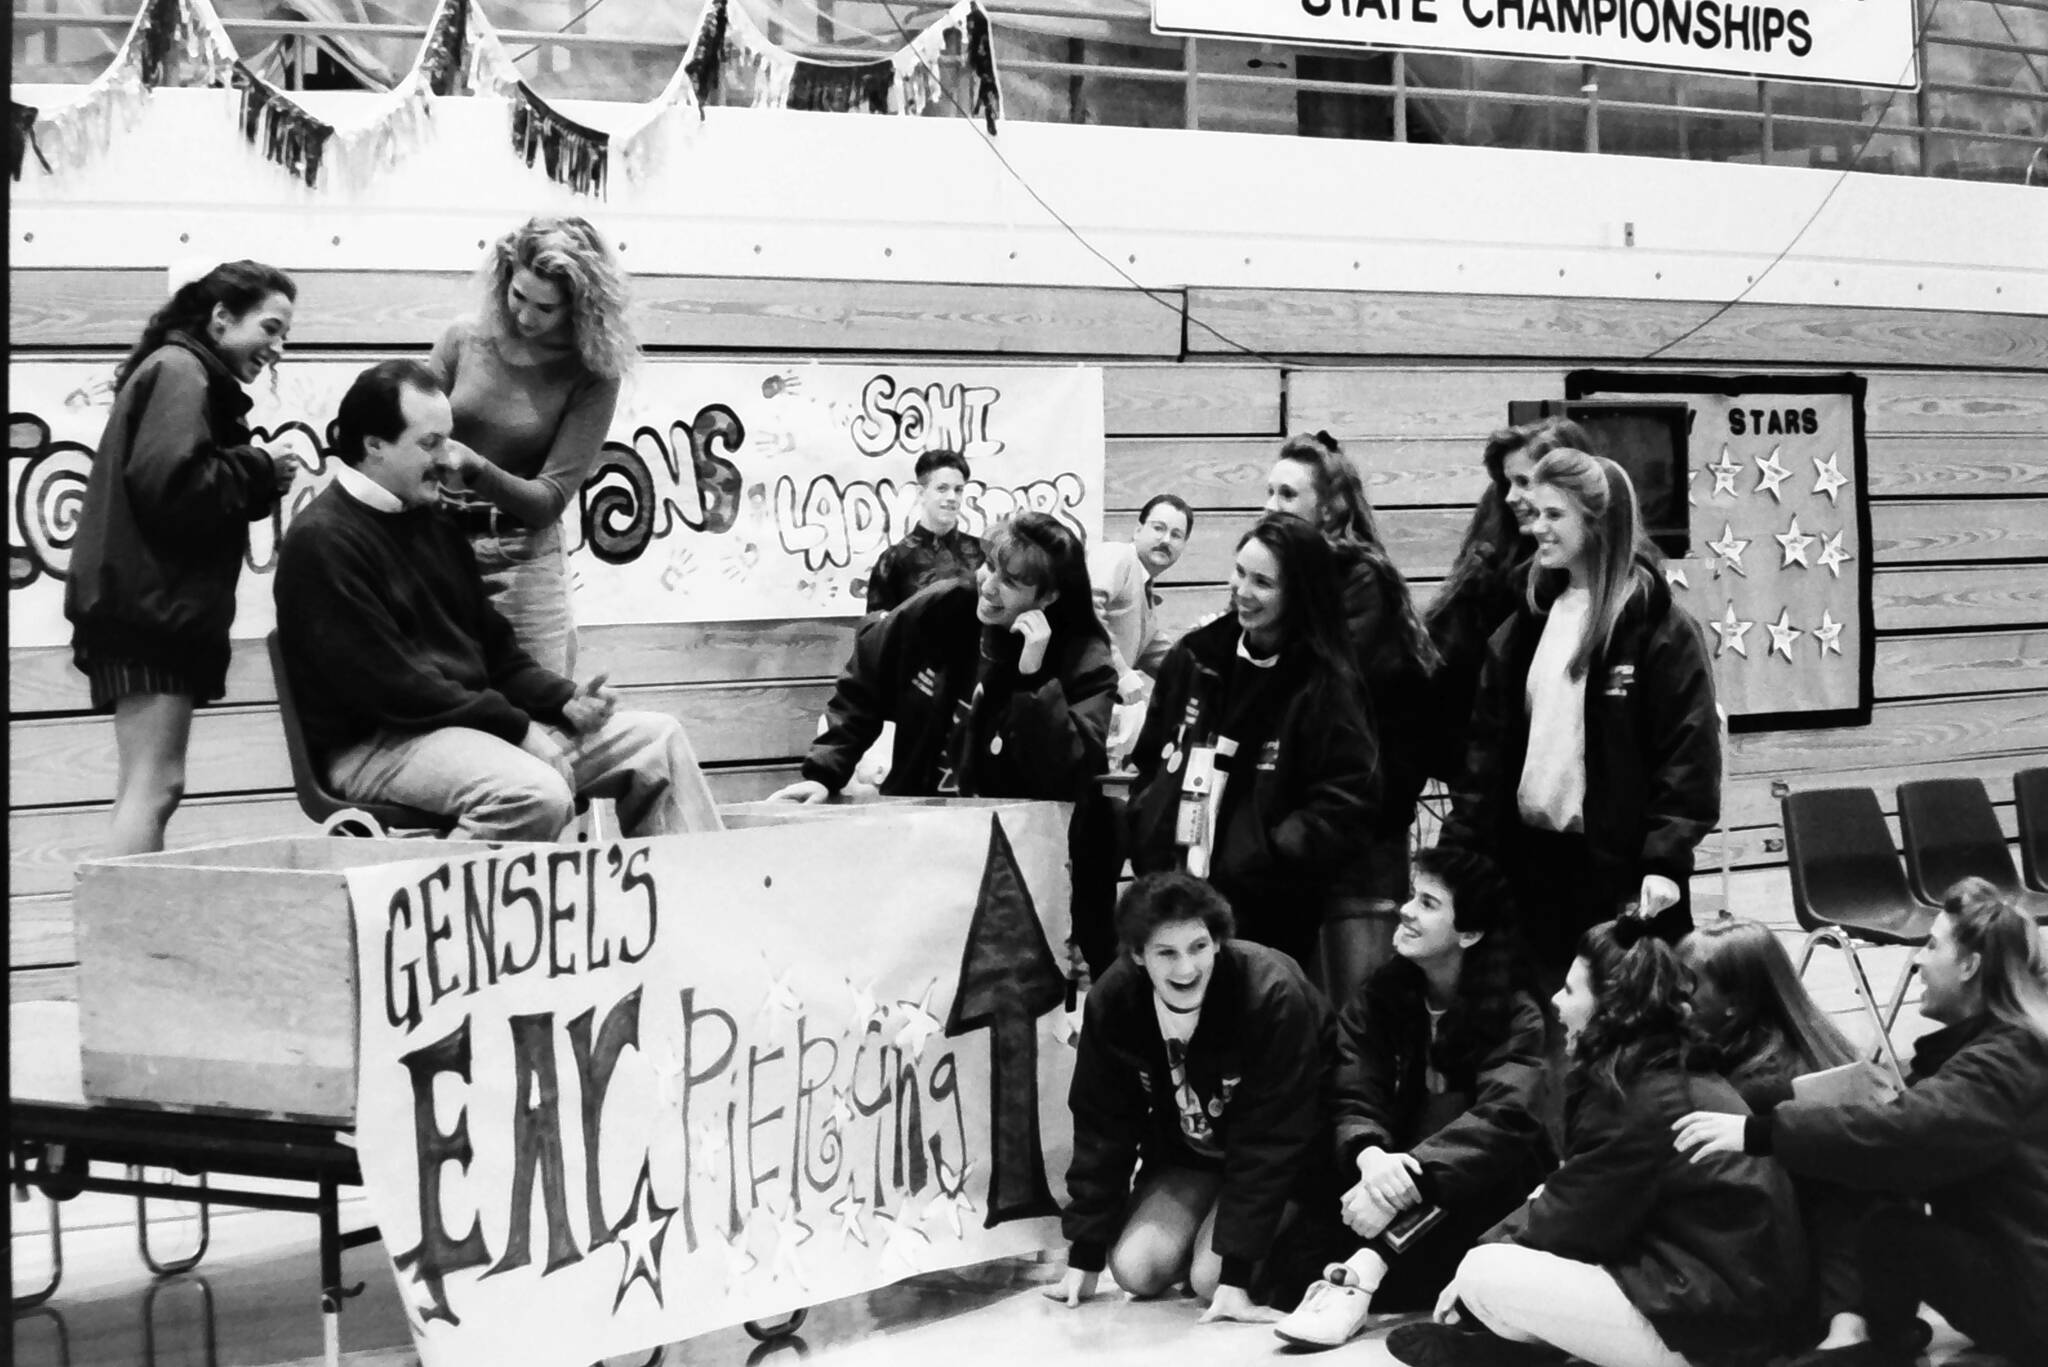 Coach Dan Gensel gets his ear pierced to celebrate Soldotna High School’s first team-sport state championship on Friday, Febr. 12, 1993 in Soldotna, Alaska. Gensel, who led the Soldotna High School girls basketball team to victory, had promised his team earlier in the season that he would get his ear pierced if they won the state title. (Rusty Swan/Peninsula Clarion)